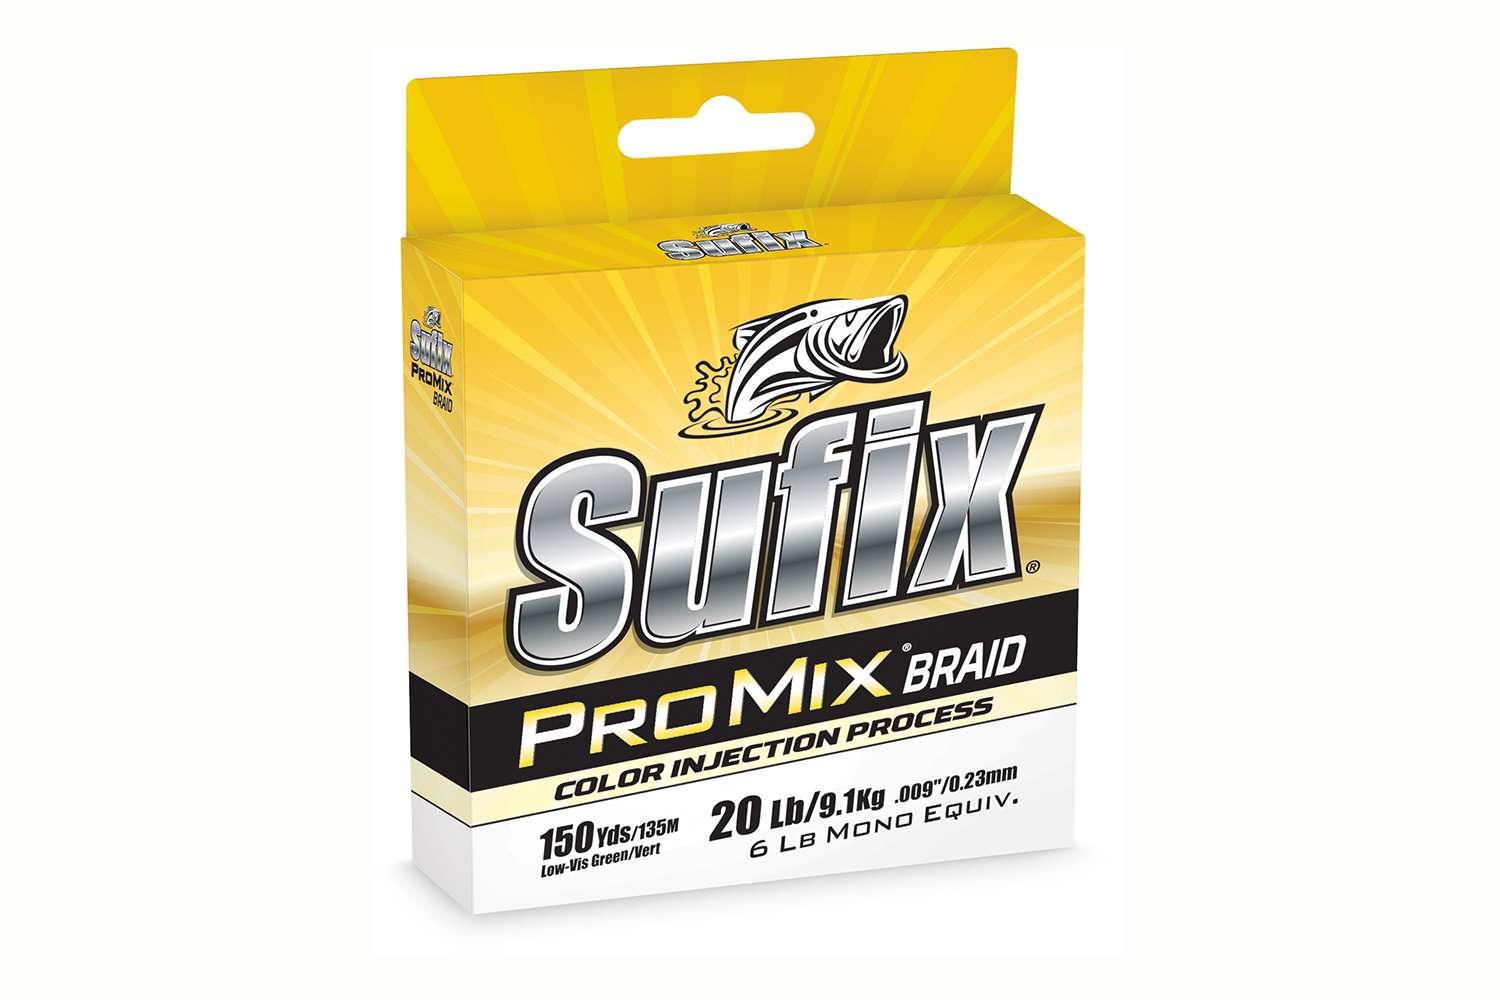 <p><b>Sufix ProMix Braid</b></p>
<p>ProMix Braid Featuring a color injection process that provides 2x color retention. ProMix has densely braided HMPE fibers with a high-weave count for consistent quality, uniform diameter and performance. Available in 150, 300, 1,200- and 3,500-yard spools in 6-, 10-, 15-, 20-, 30-, 40-, 50-, 65- and 80-pound test.</p>
<p><a href=